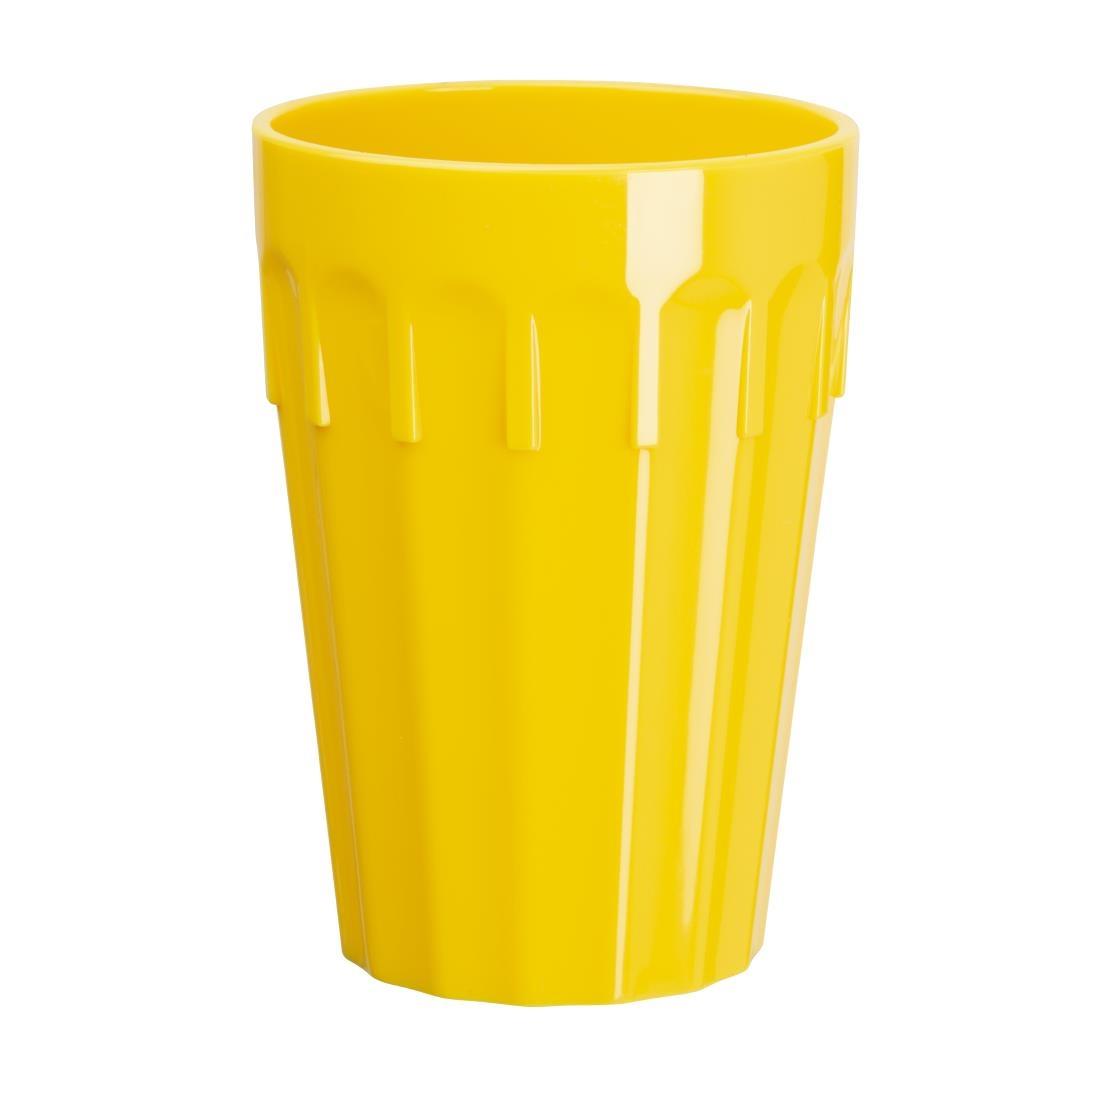 Olympia Kristallon Polycarbonate Tumblers Yellow 260ml (Pack of 12) - CB775  - 1